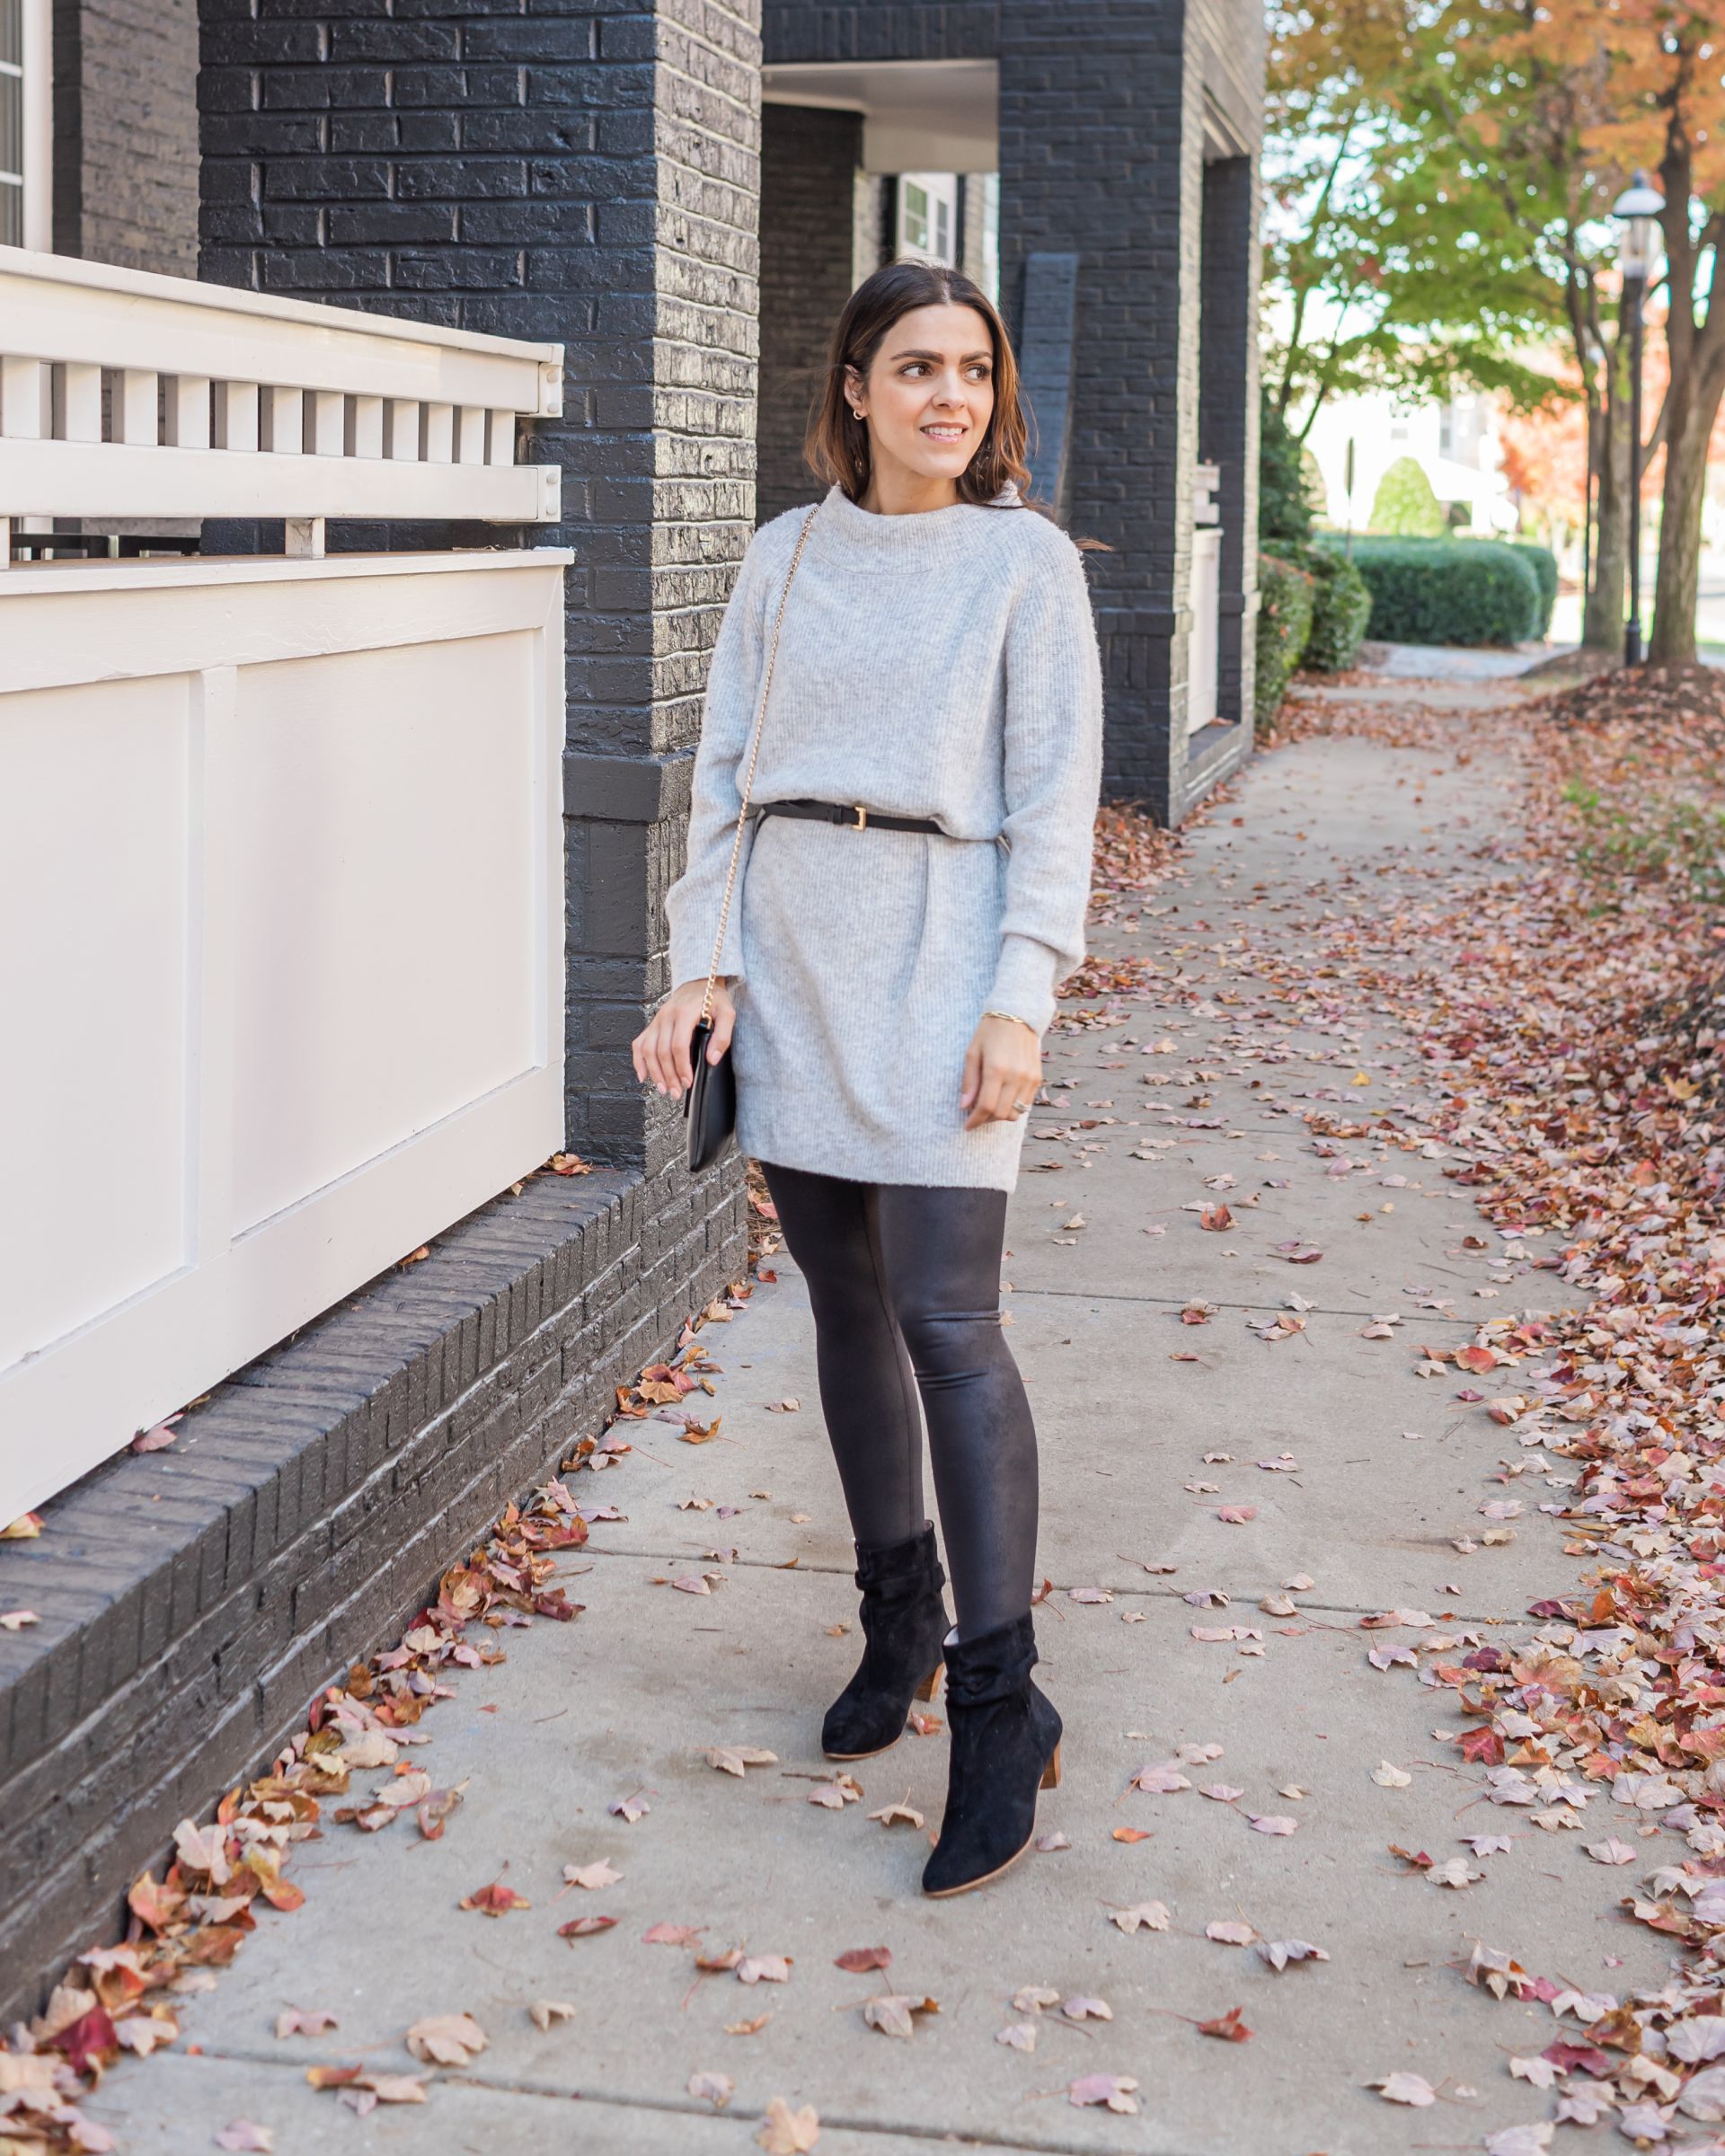 Grey Sweater Dress with Black Leggings Outfits (3 ideas & outfits